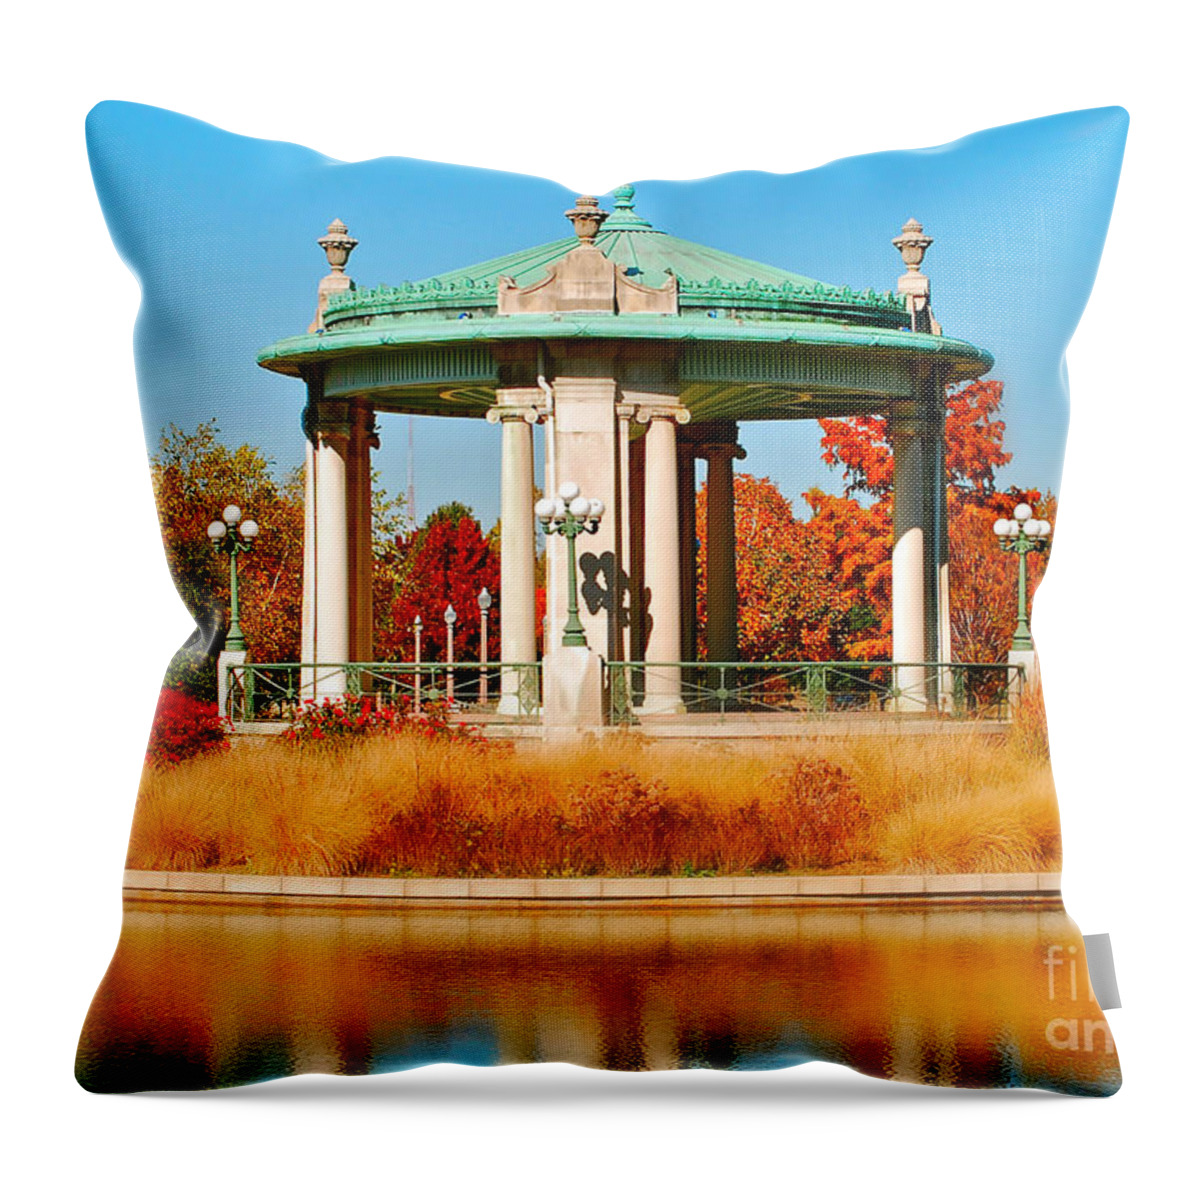 Landscape Throw Pillow featuring the photograph Forest Park Gazebo by Peggy Franz